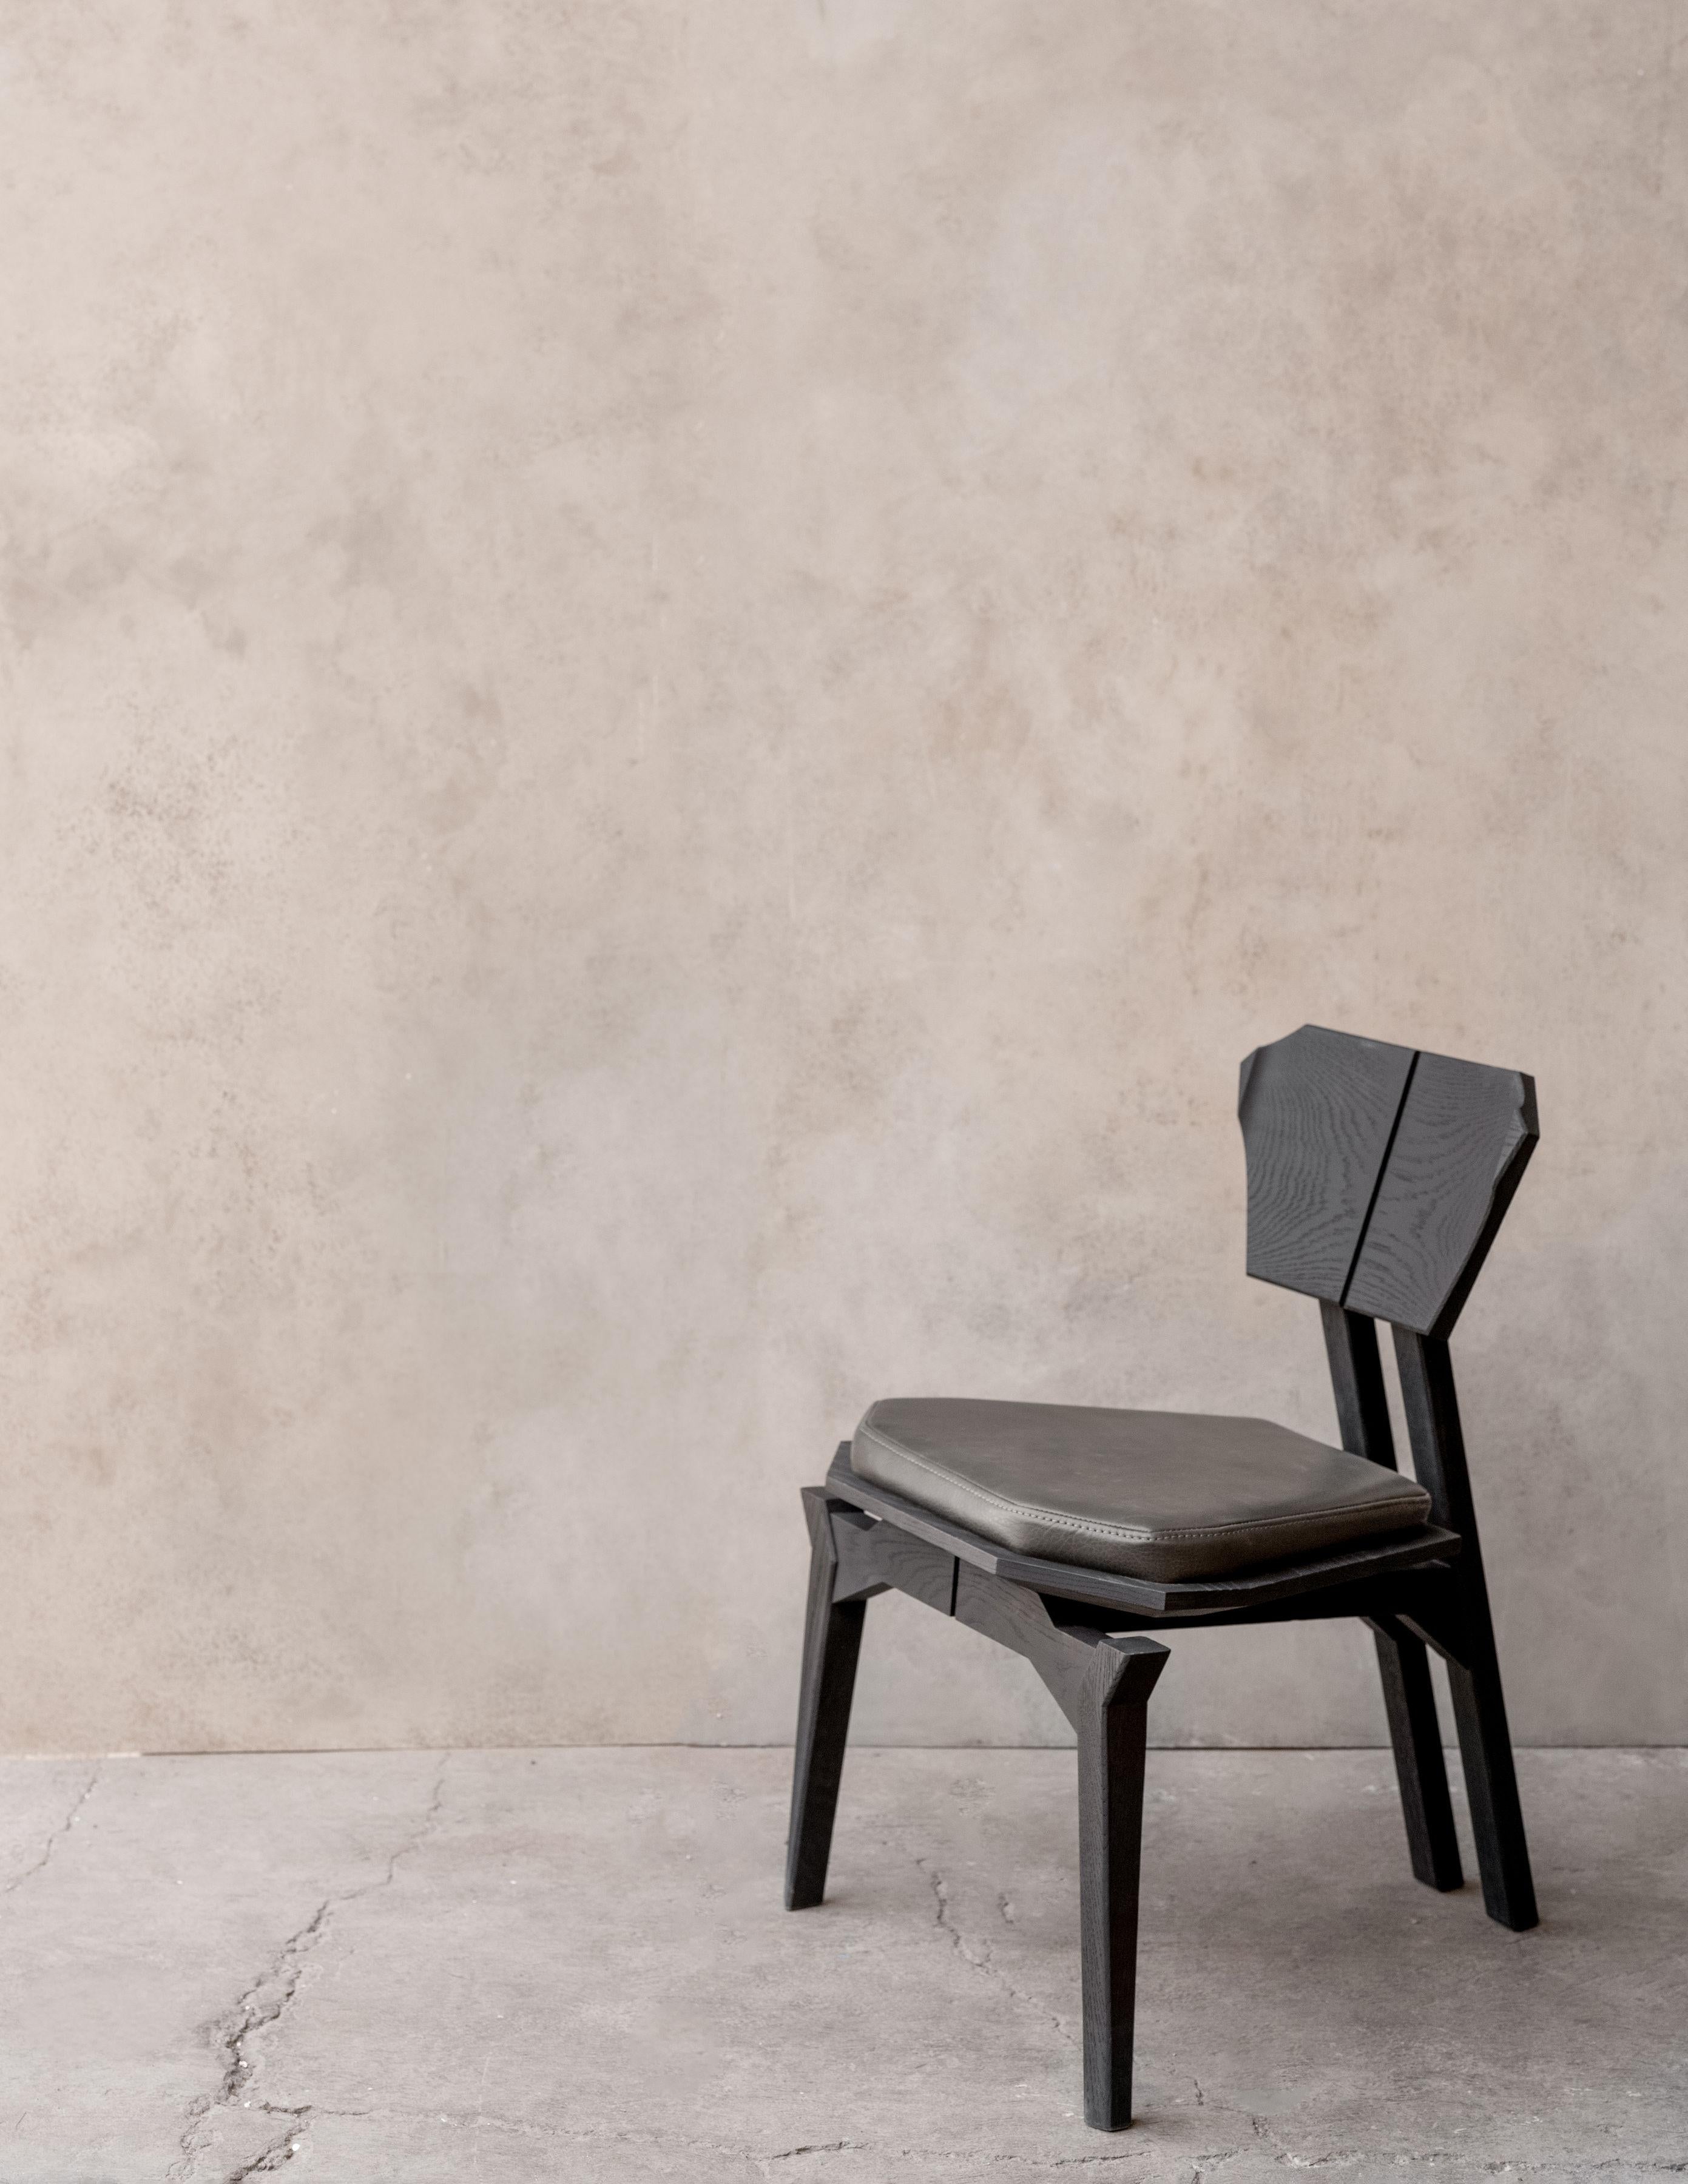 Black Ángulo chair by Arturo Verástegui
Dimensions: D 54 x W 60 x H 78 cm
Materials: oak wood, leather.
Available in leather or fabric.

Chair made of burnt and natural white oak with upholstered seat in fabric or leather.

Arturo Verástegui